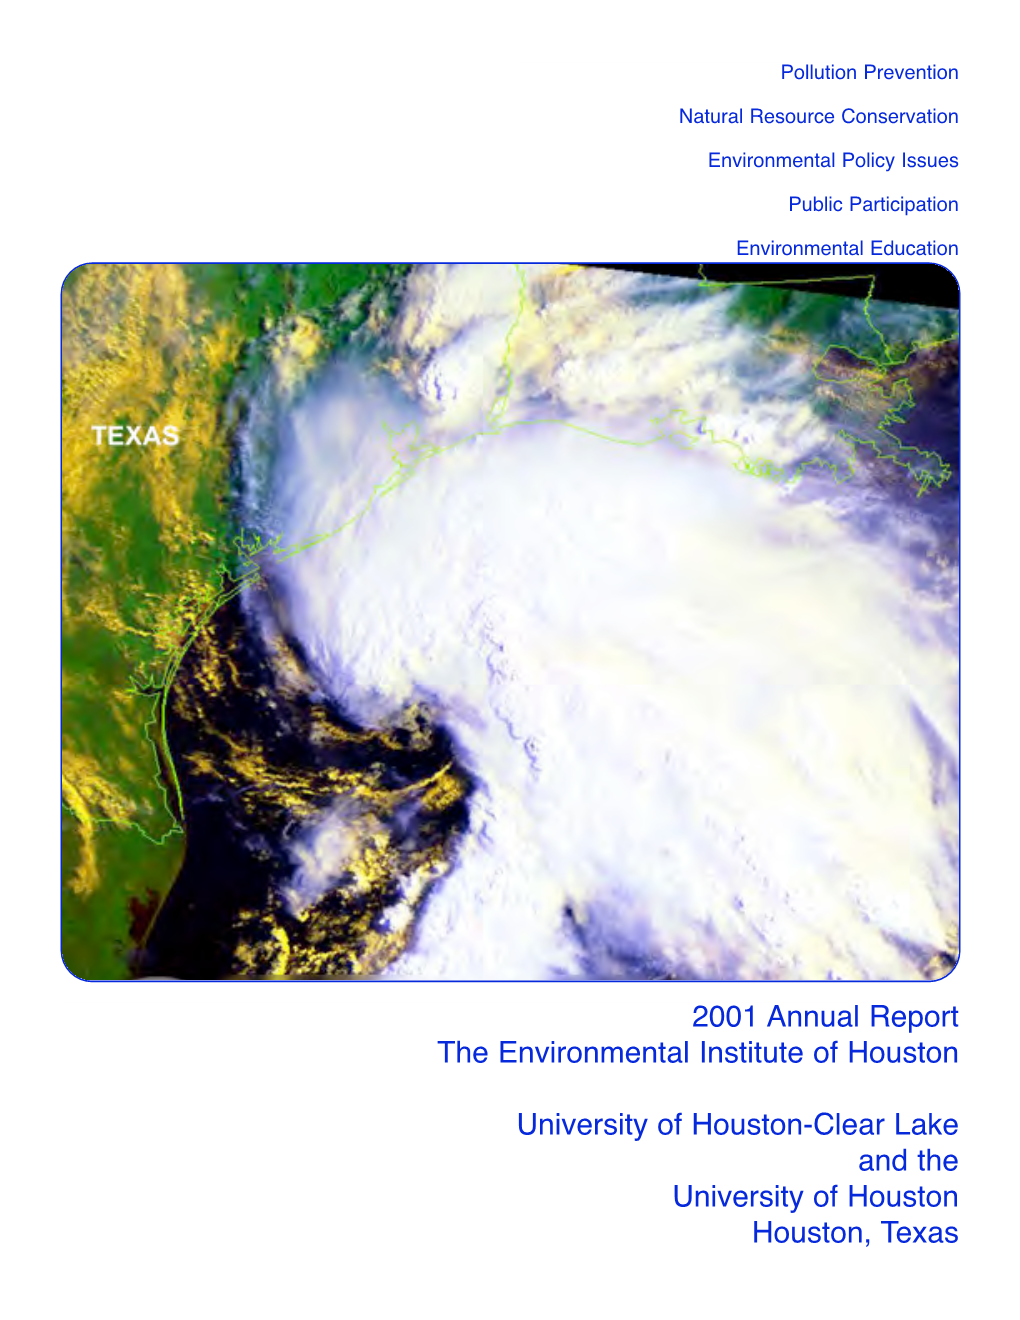 2001 Annual Report of the Environmental Institute of Houston